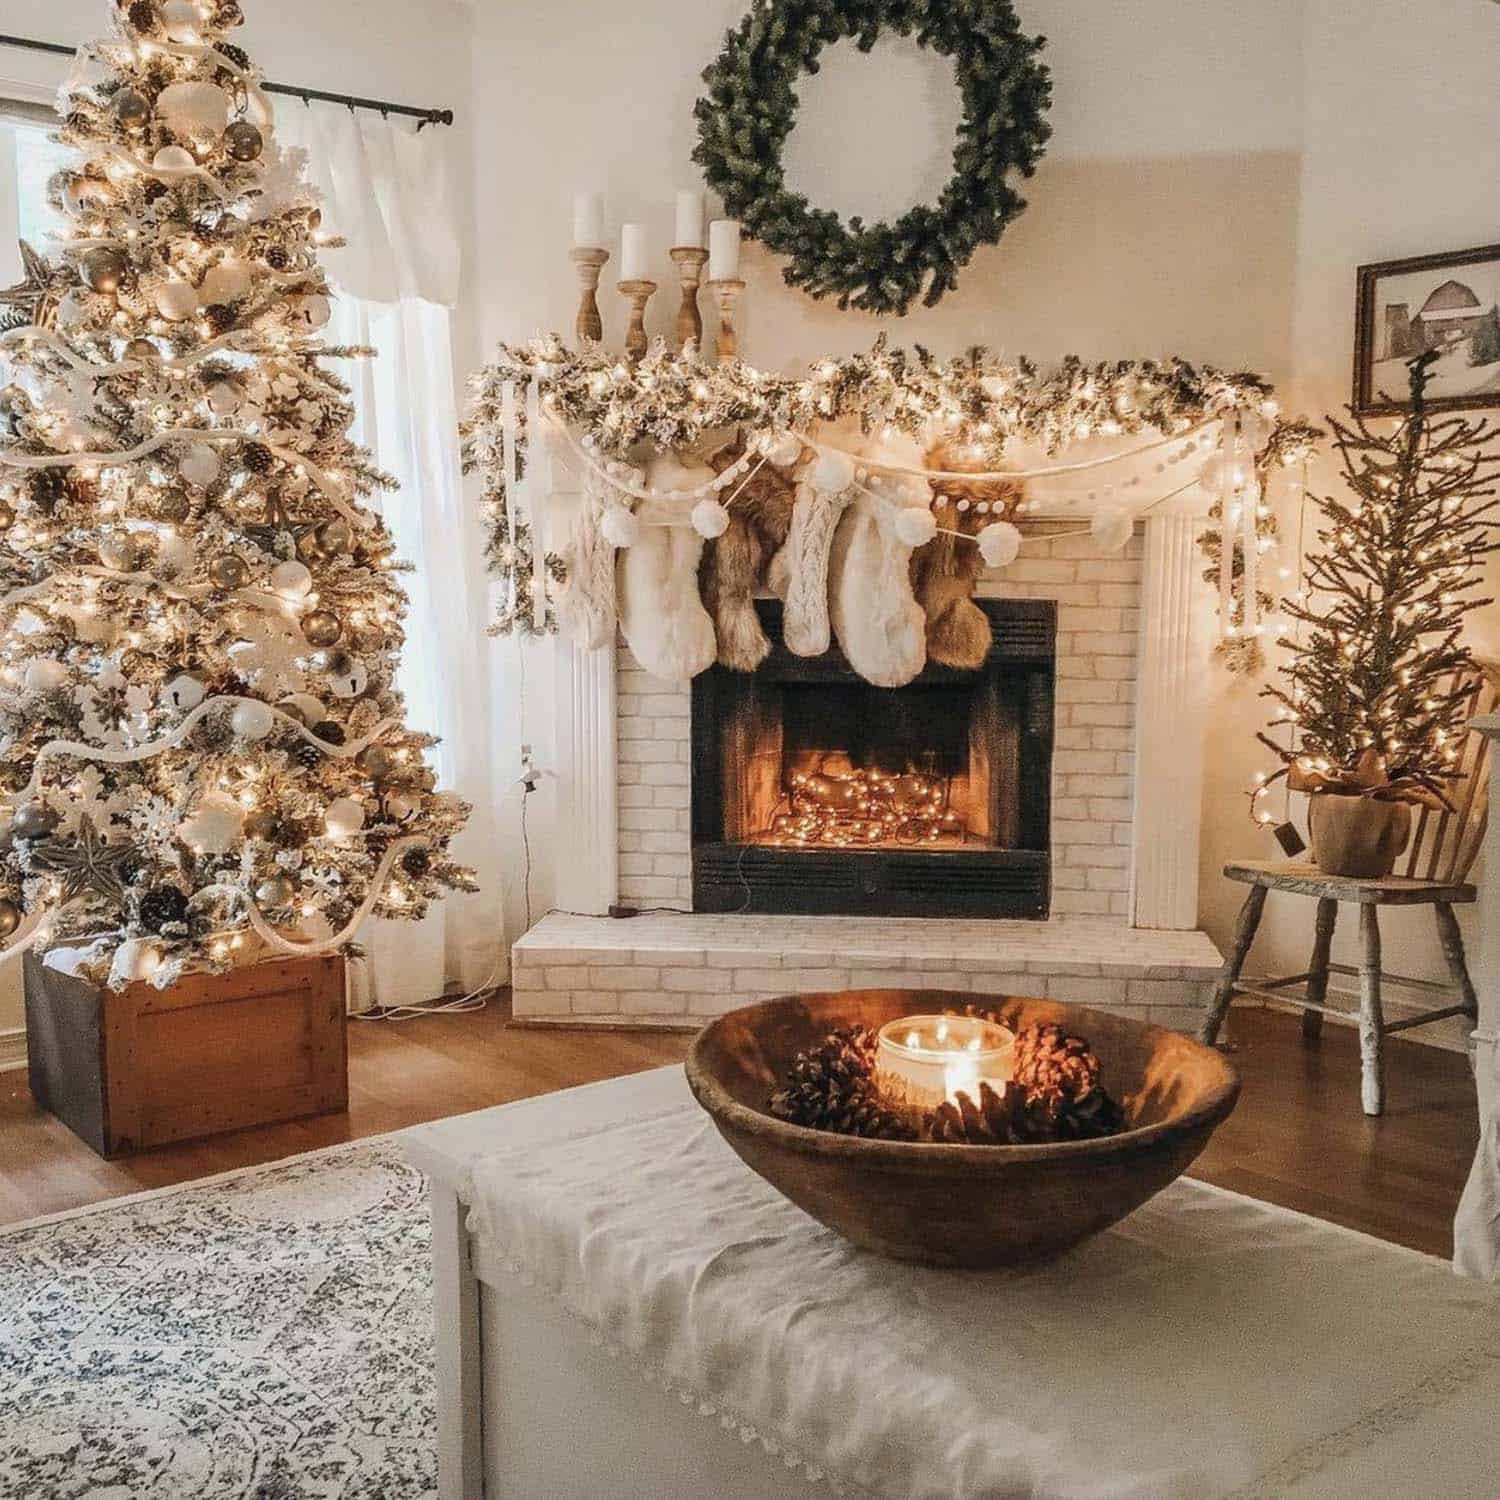  cozy family room with a flocked Christmas tree and garland on the fireplace mantel with stockings and candles